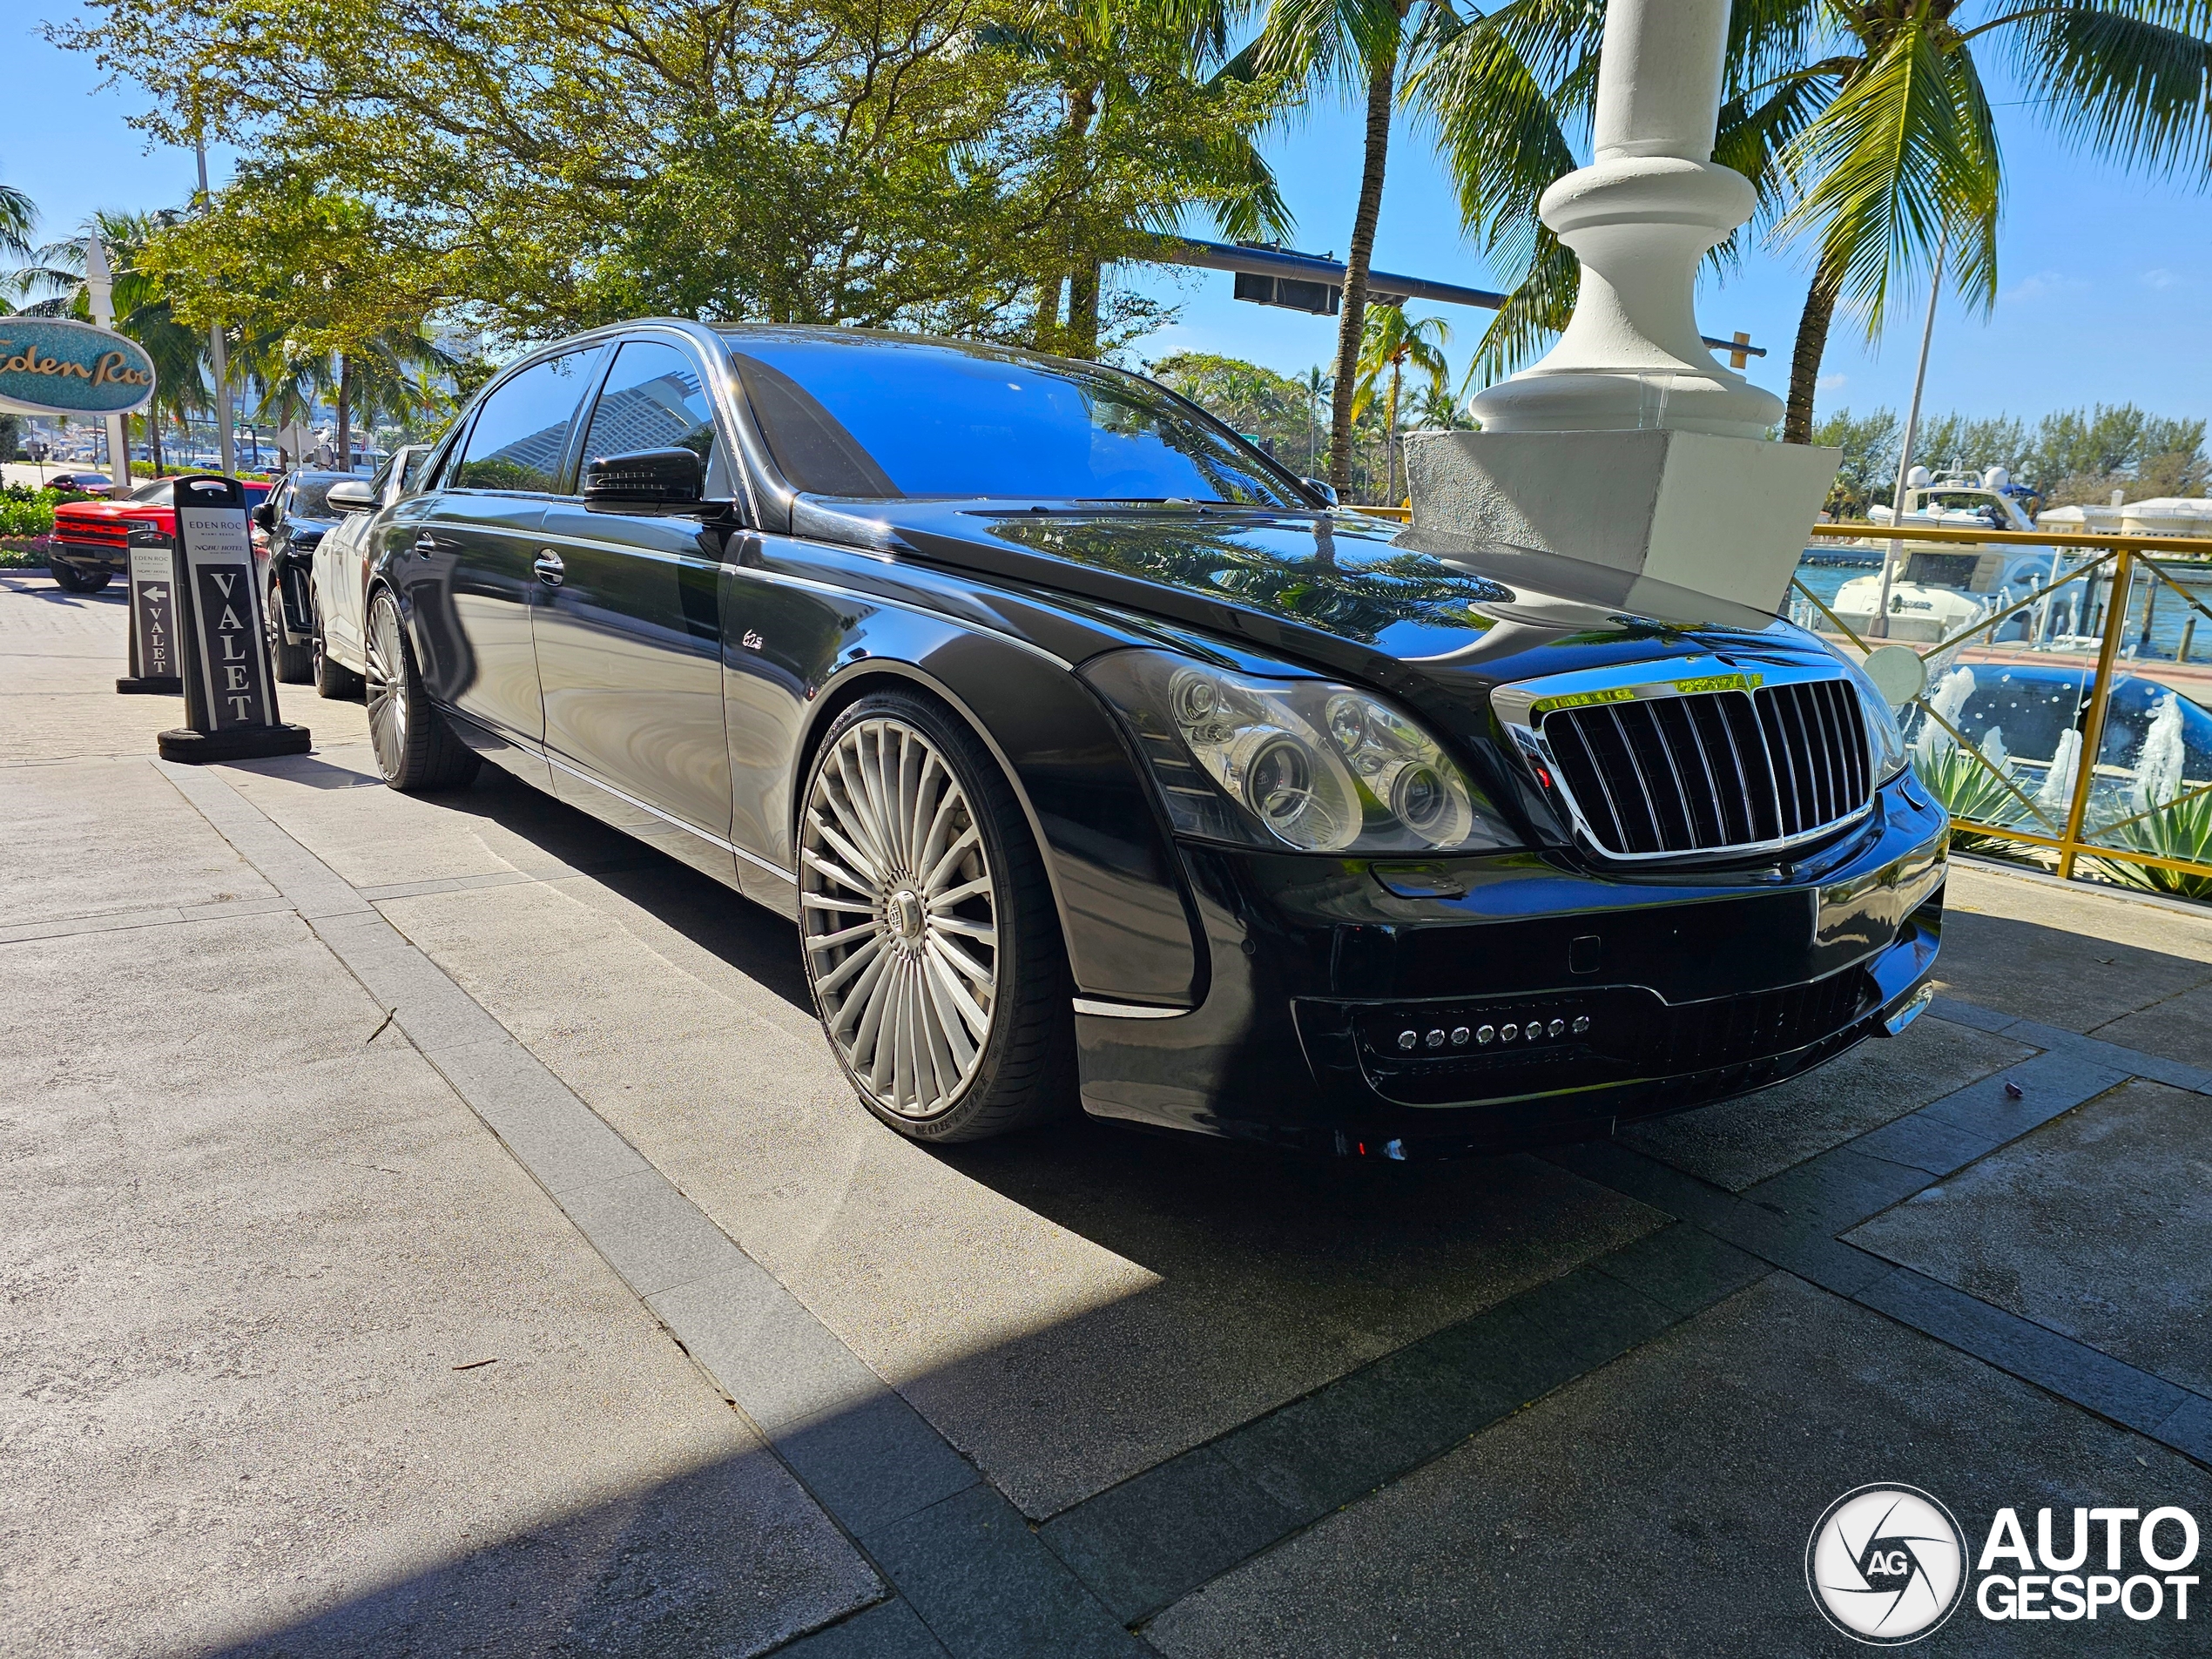 Is this the perfect limousine for Miami Beach?